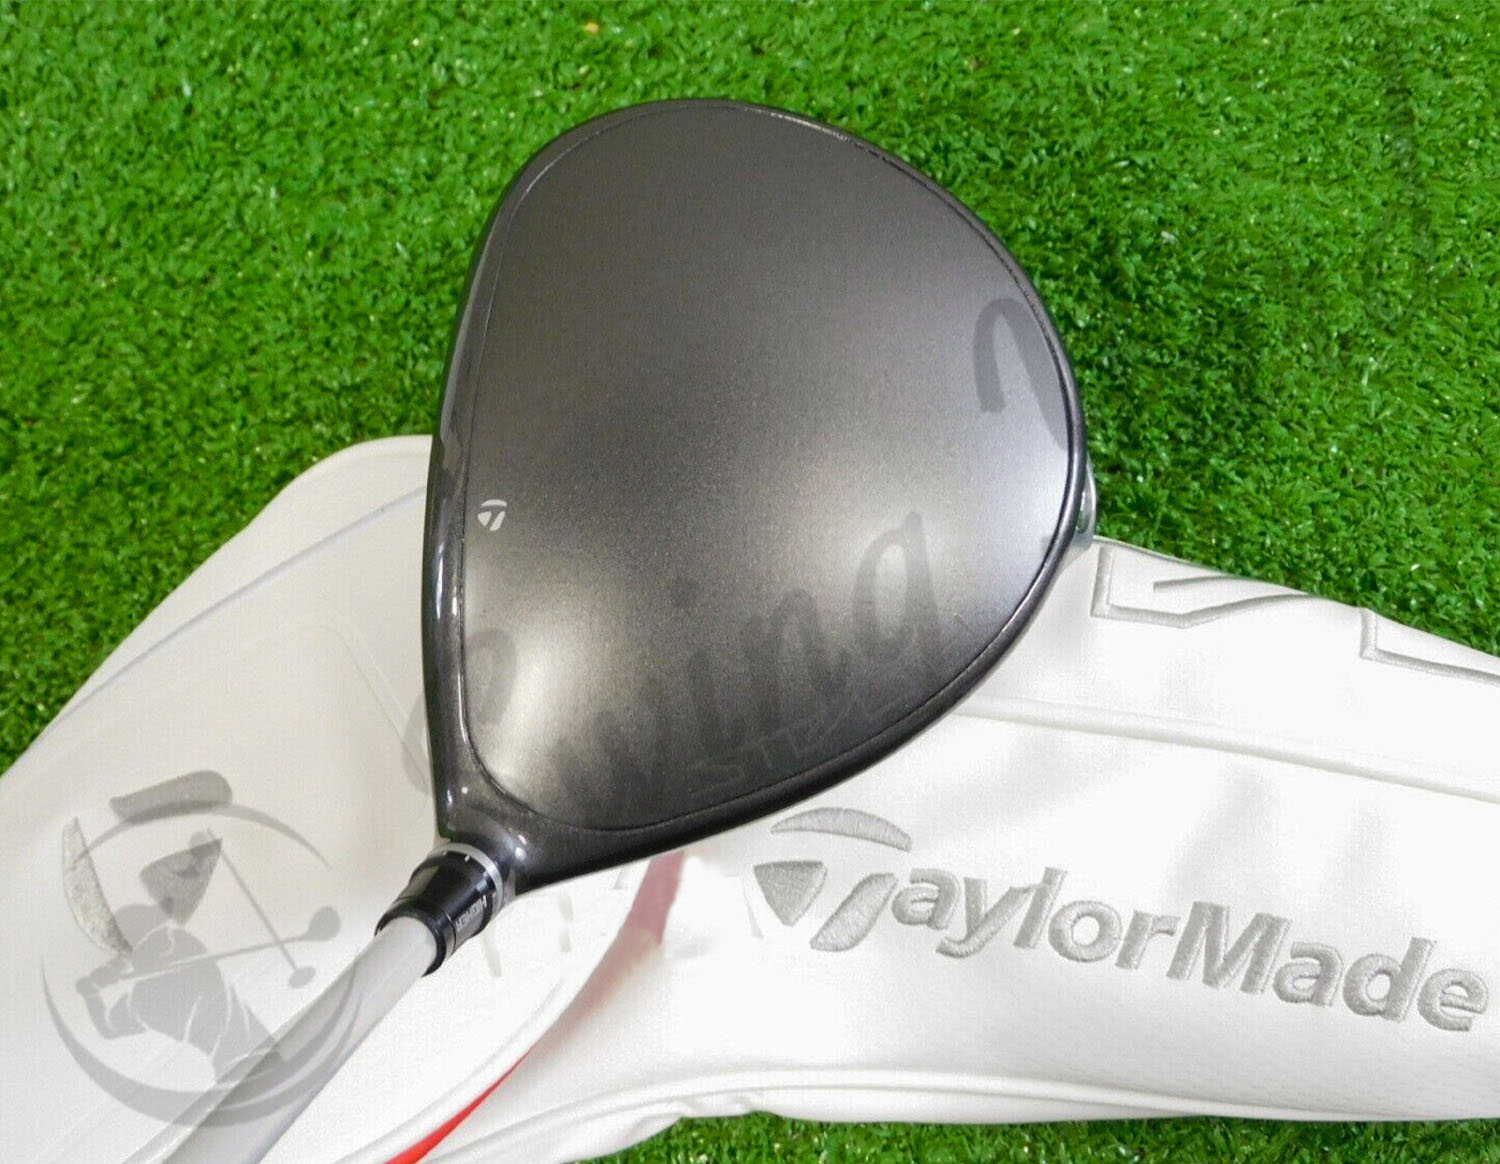 The club head of TaylorMade Stealth HD driver at the golf course